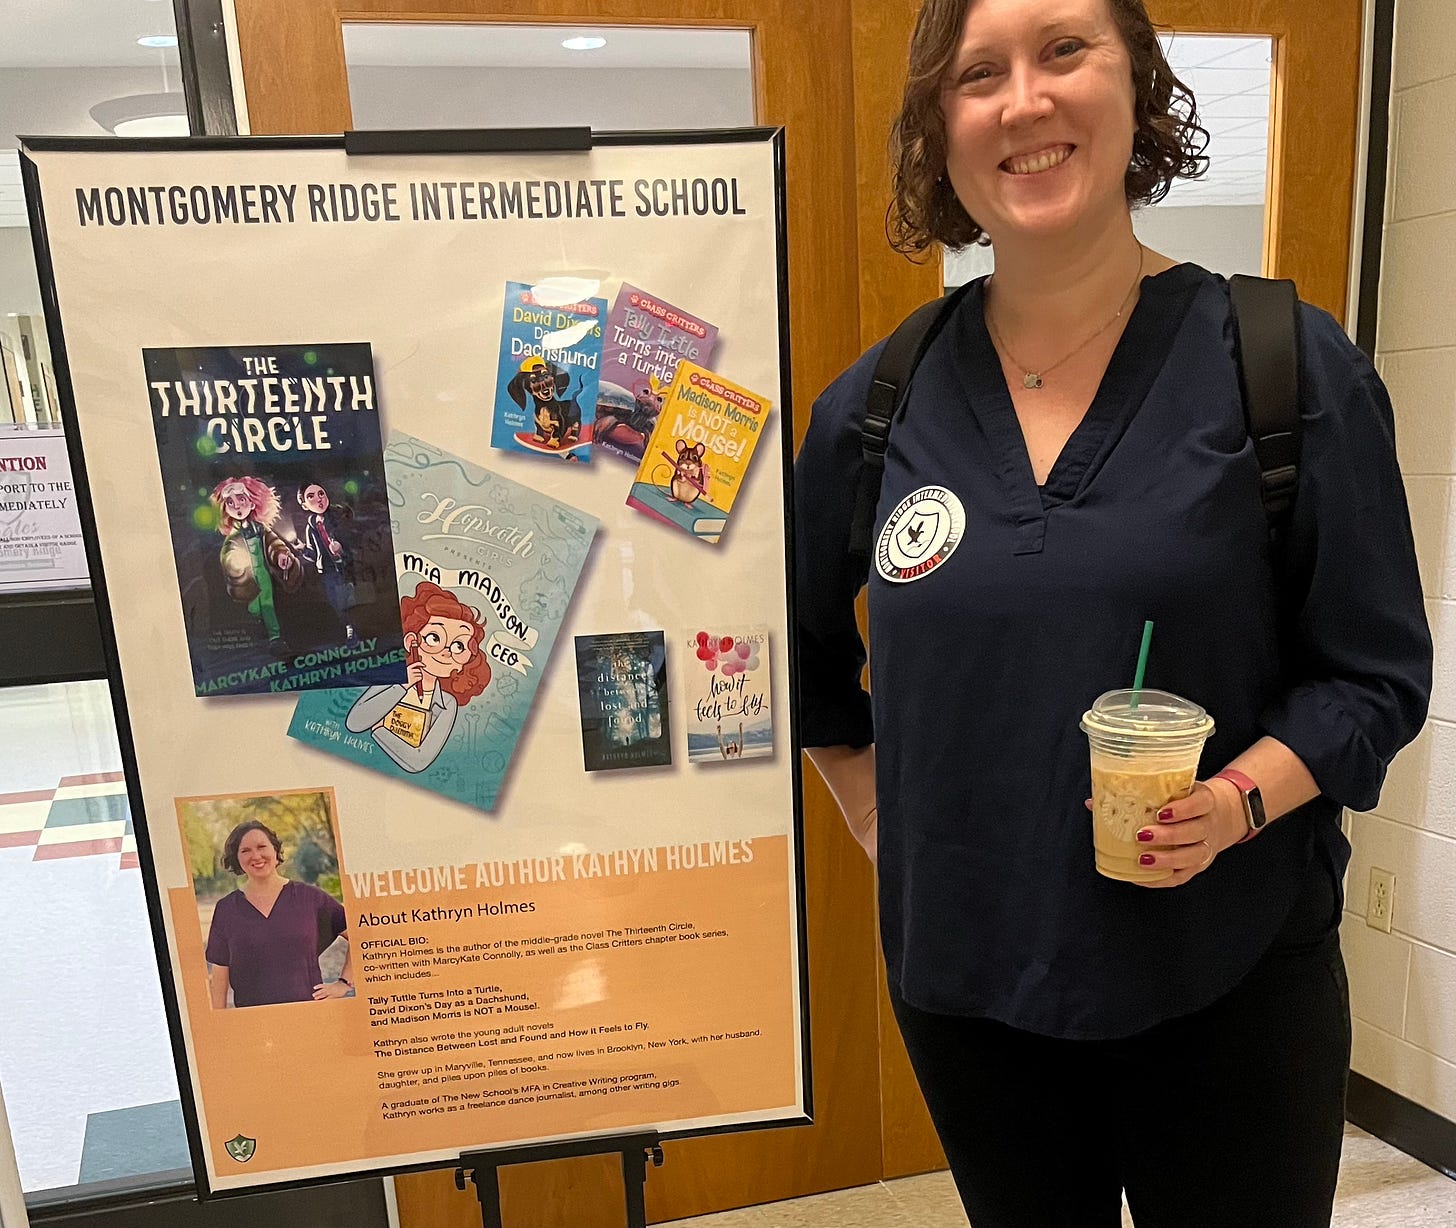 Kathryn at a recent school visit, posing with a poster showing all of her published books including The Thirteenth Circle.